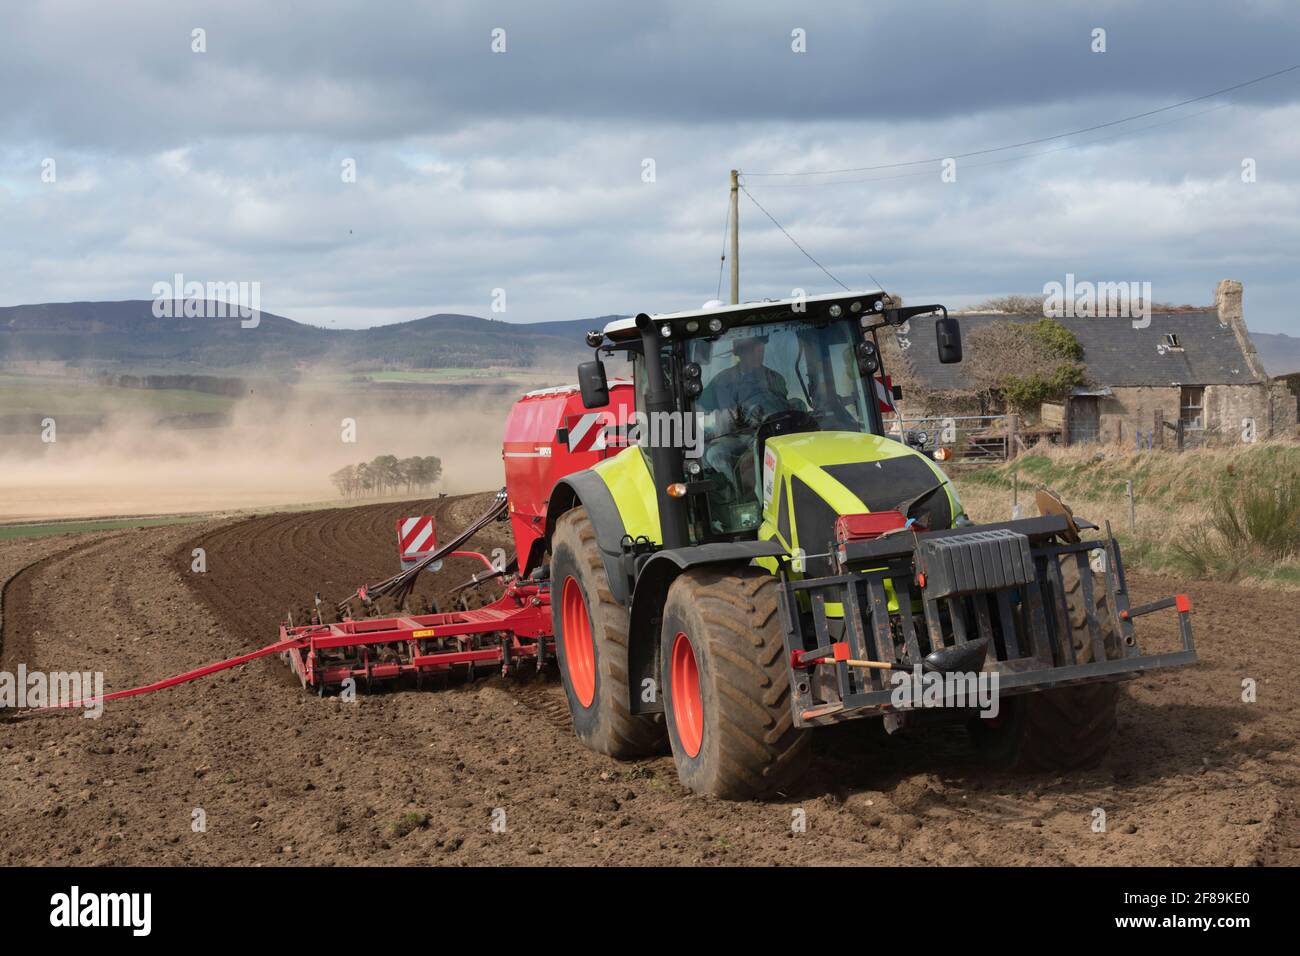 A Front View of a Tractor Pulling a Universal Seed Drill in a Field in Rural Scotland Stock Photo